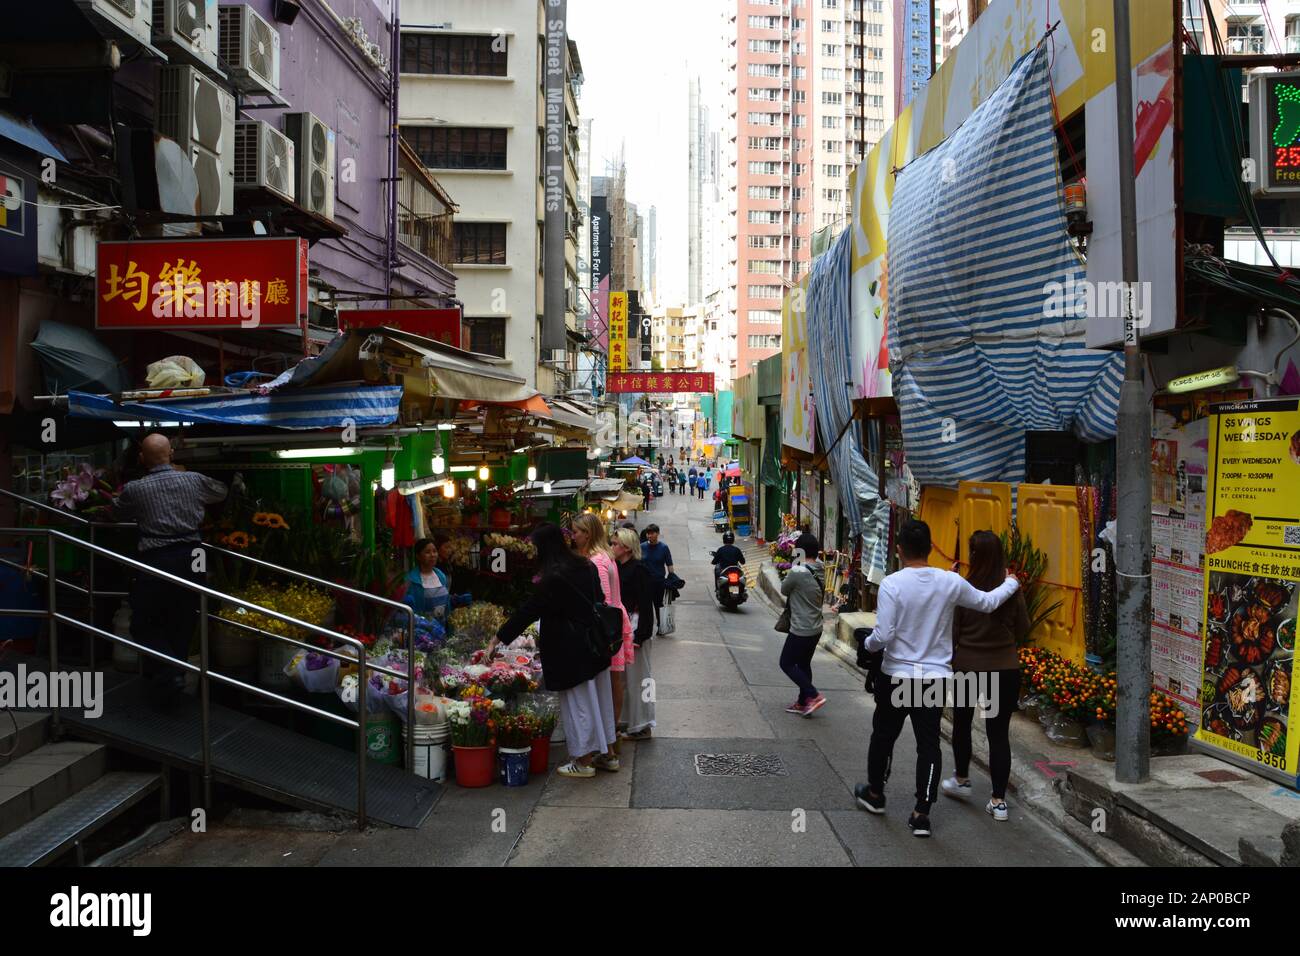 A street market selling flowers in the Mid Levels Neighborhood of Hong Kong. Stock Photo